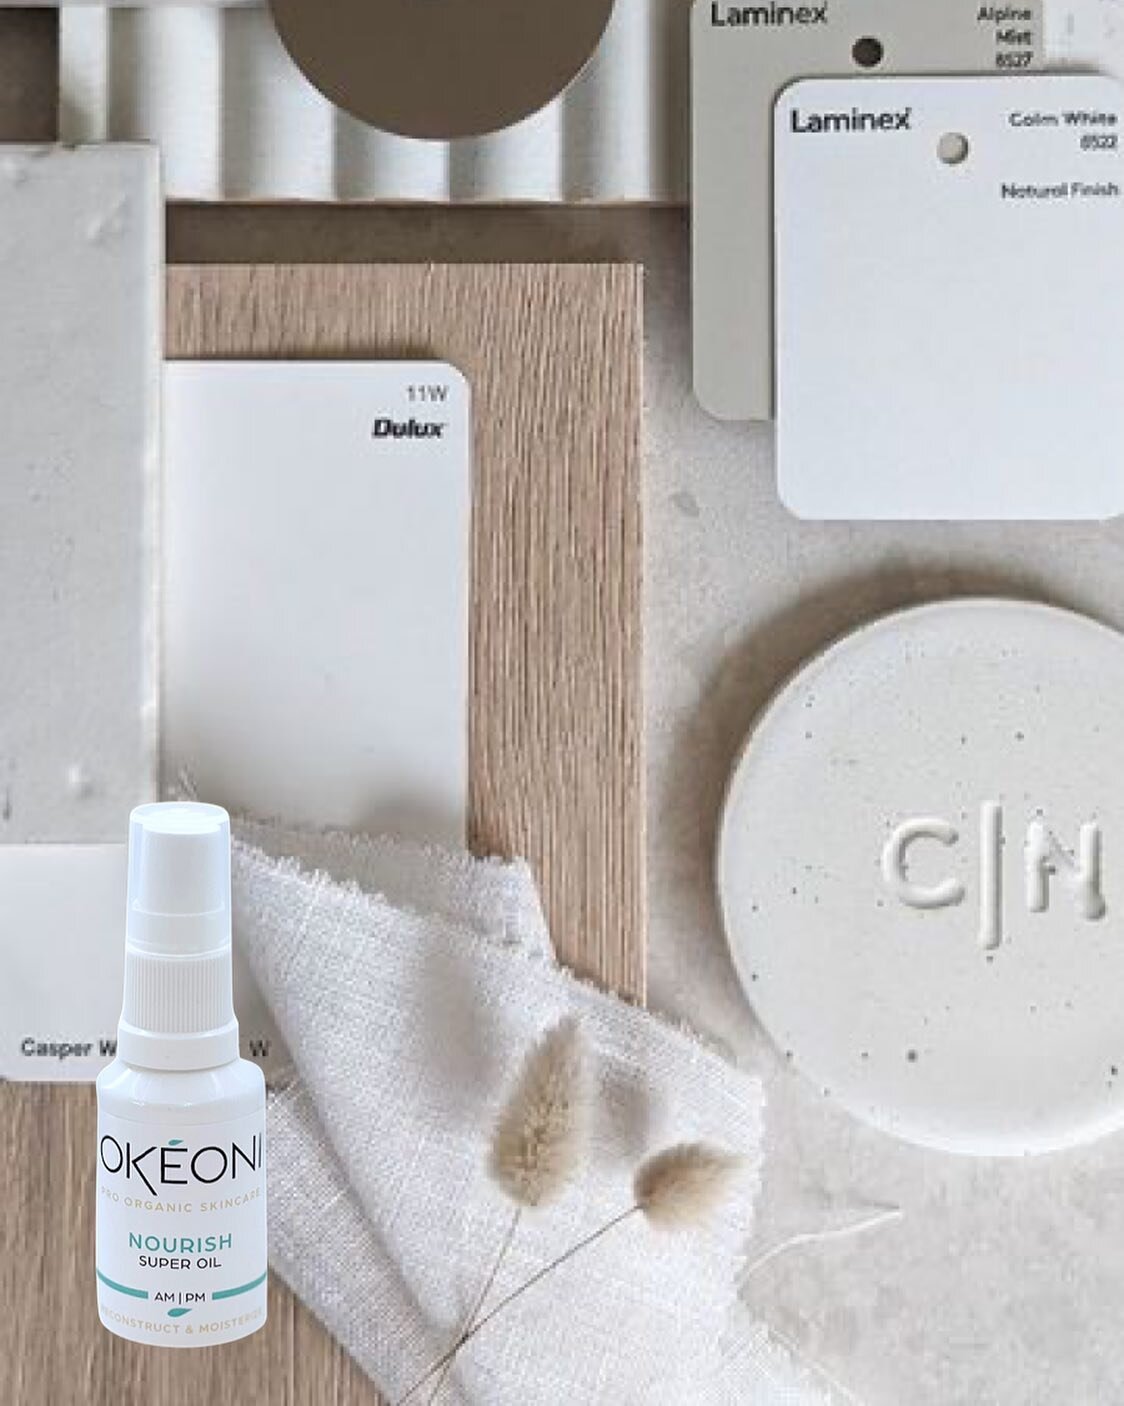 So much is happening over here @okeoniskincare right now! Our newest Project. 

What&rsquo;s coming is going to be Epic for our brand and our Stockists partners.. We are so excited. 
It&rsquo;s the busy end of the year as we prepare for Xmas and laun